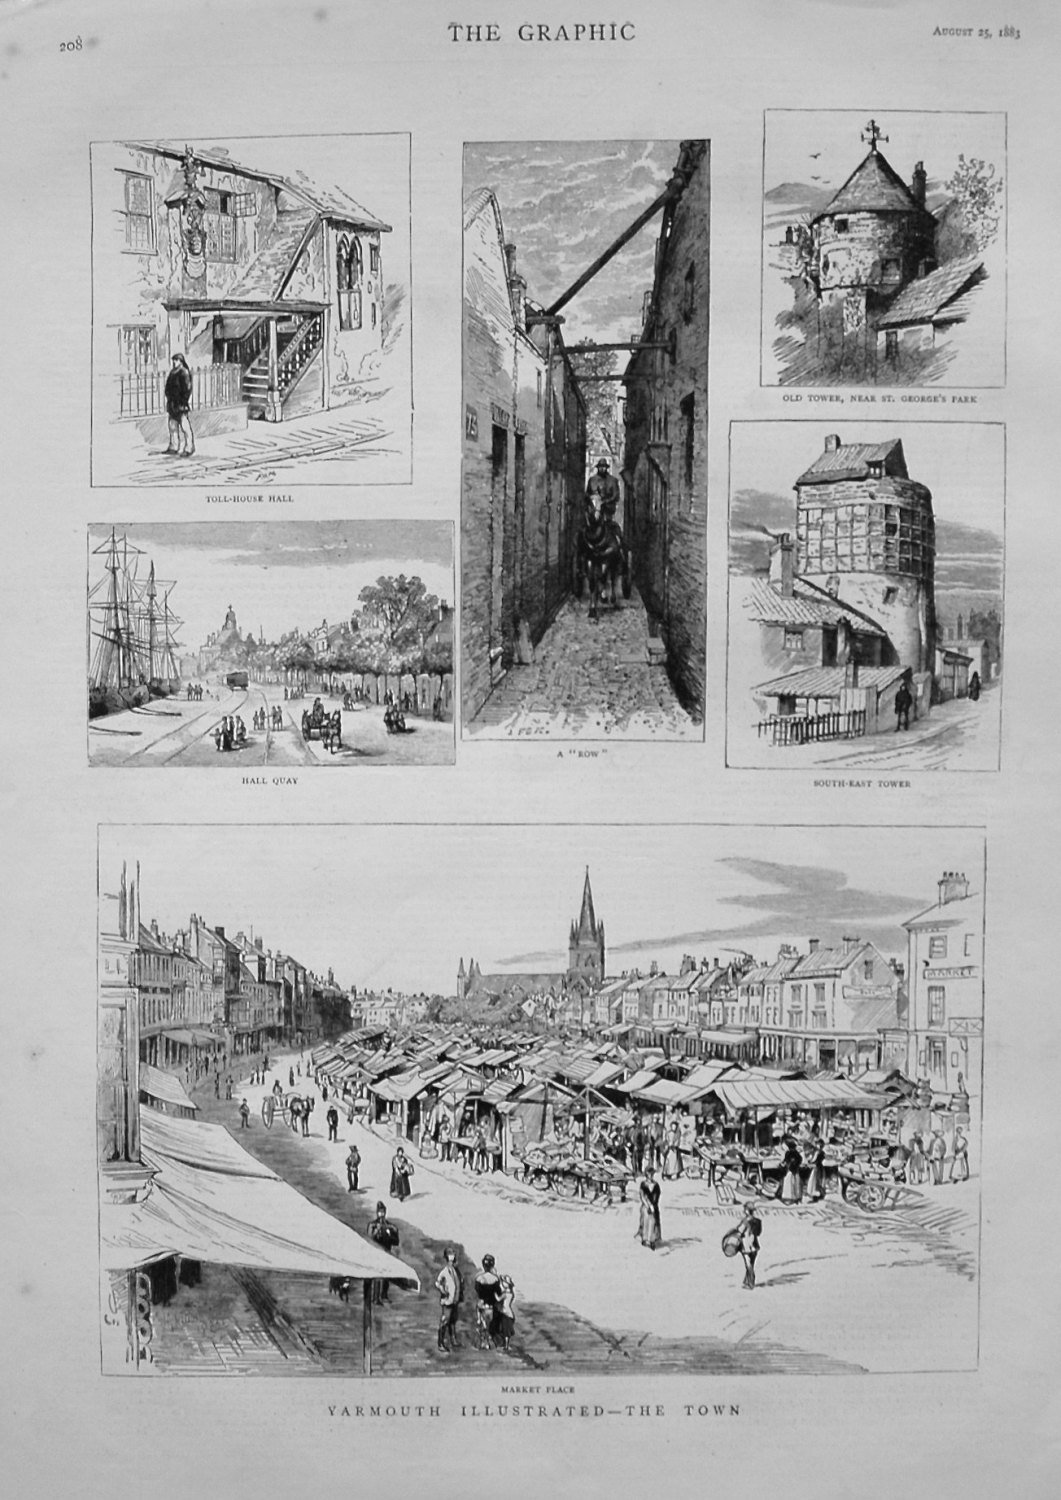 Yarmouth Illustrated - The Town. 1883.